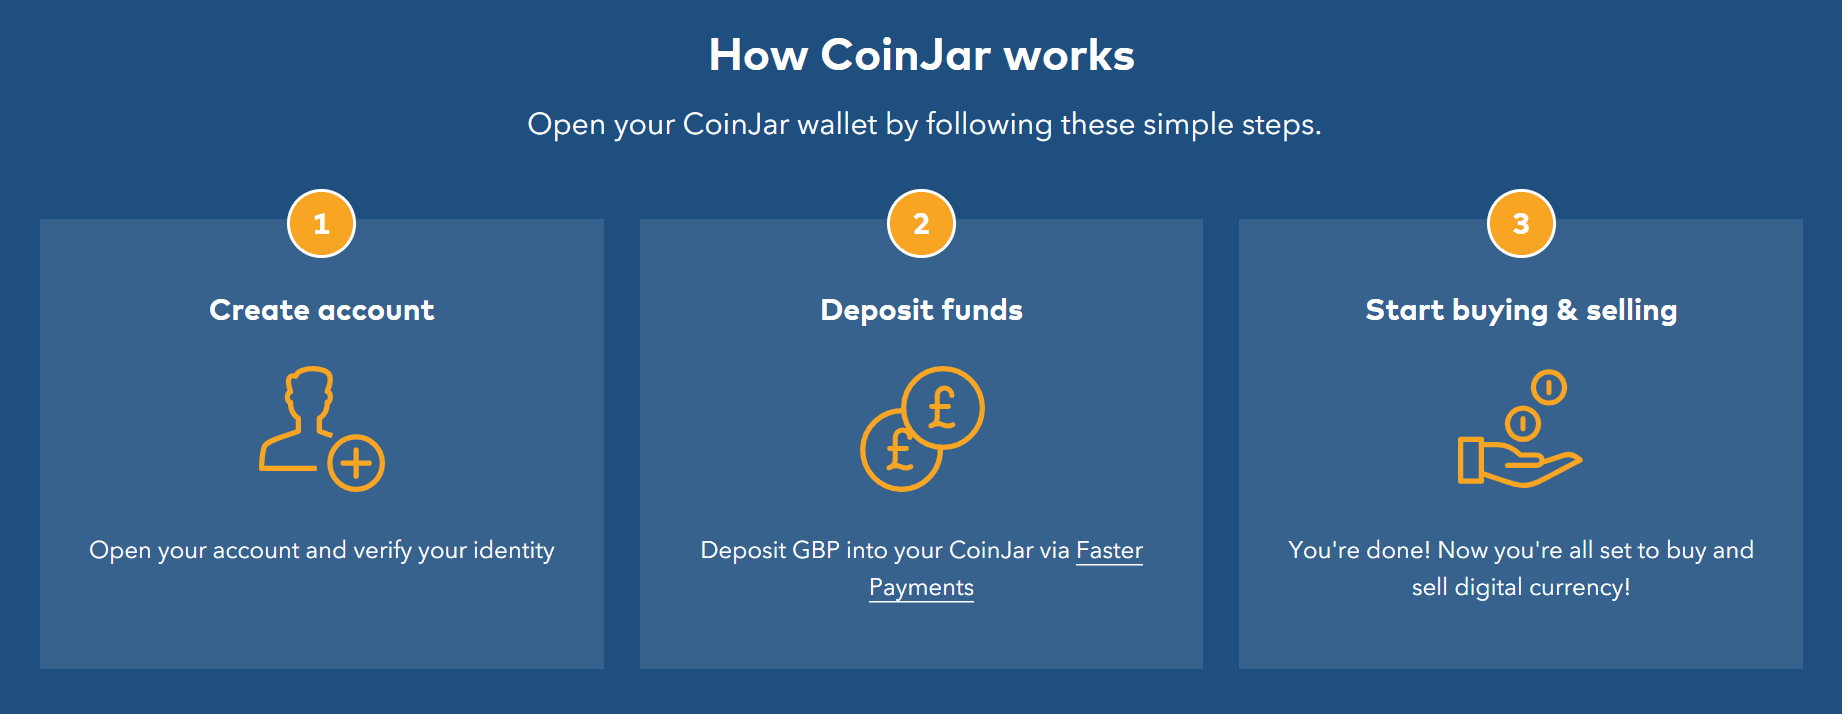 coinjar payments